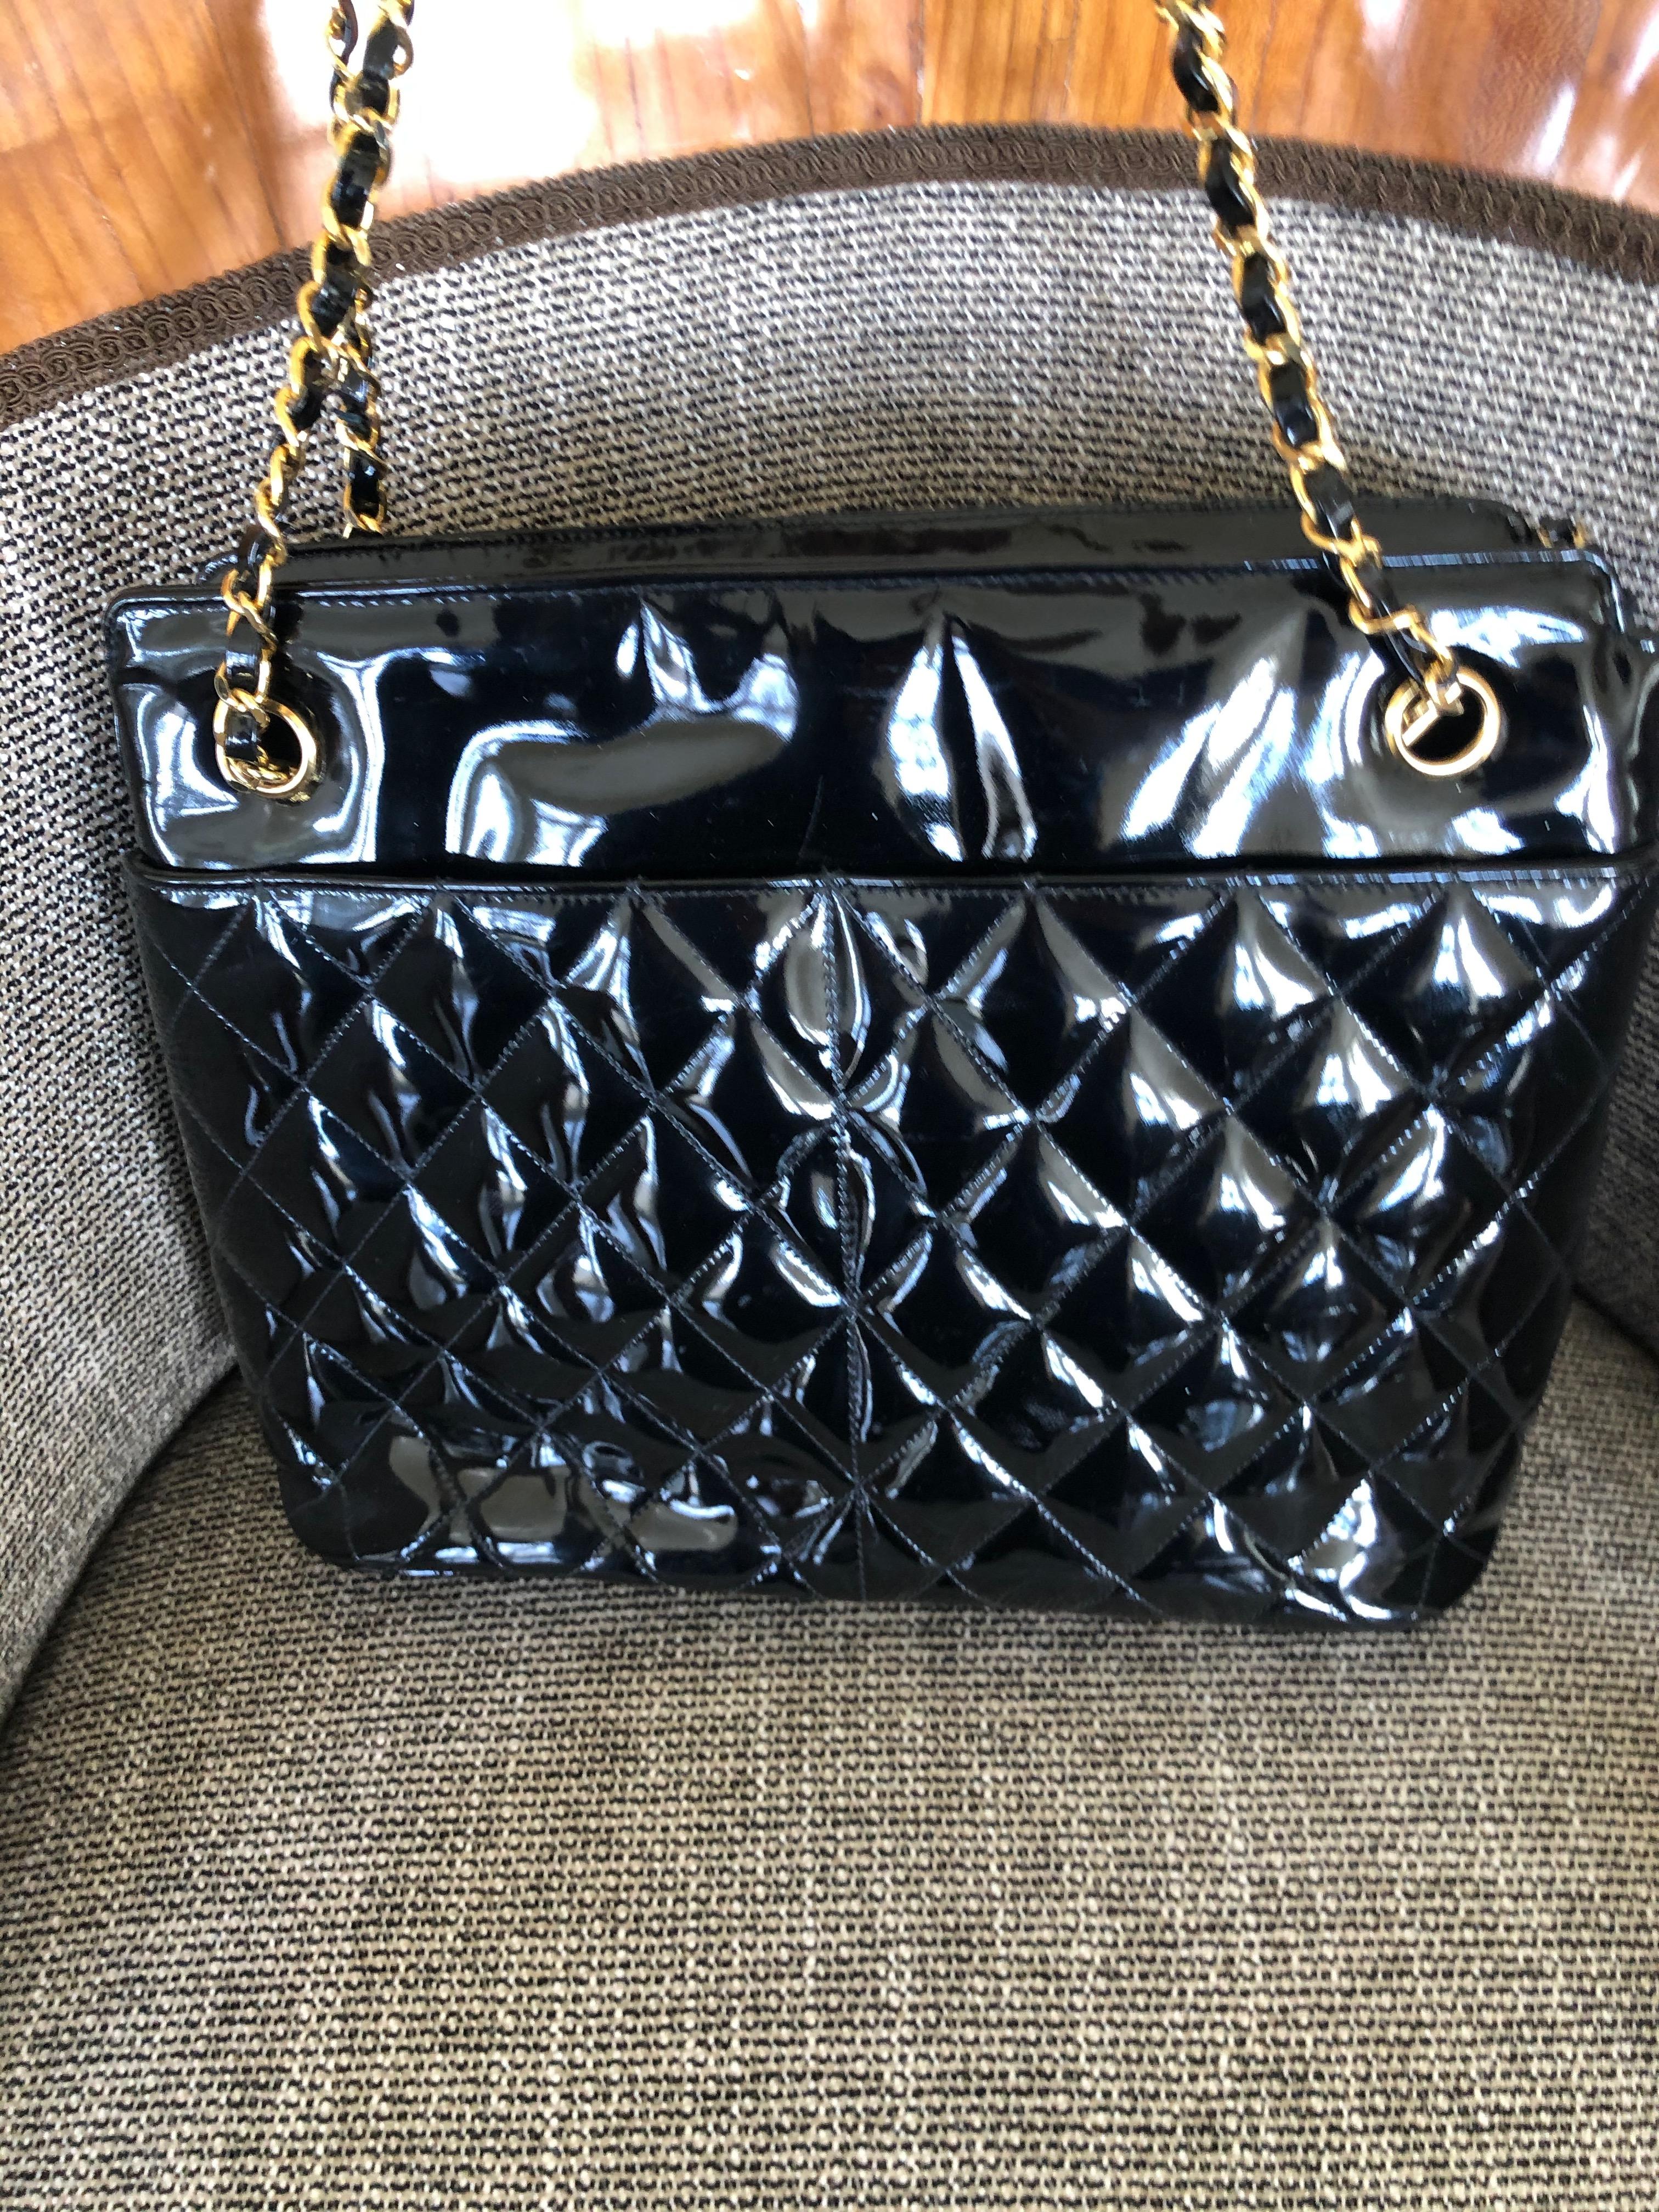 Chanel Black Quilted Patent Leather Tote Bag with Gold Chain Handle.
12